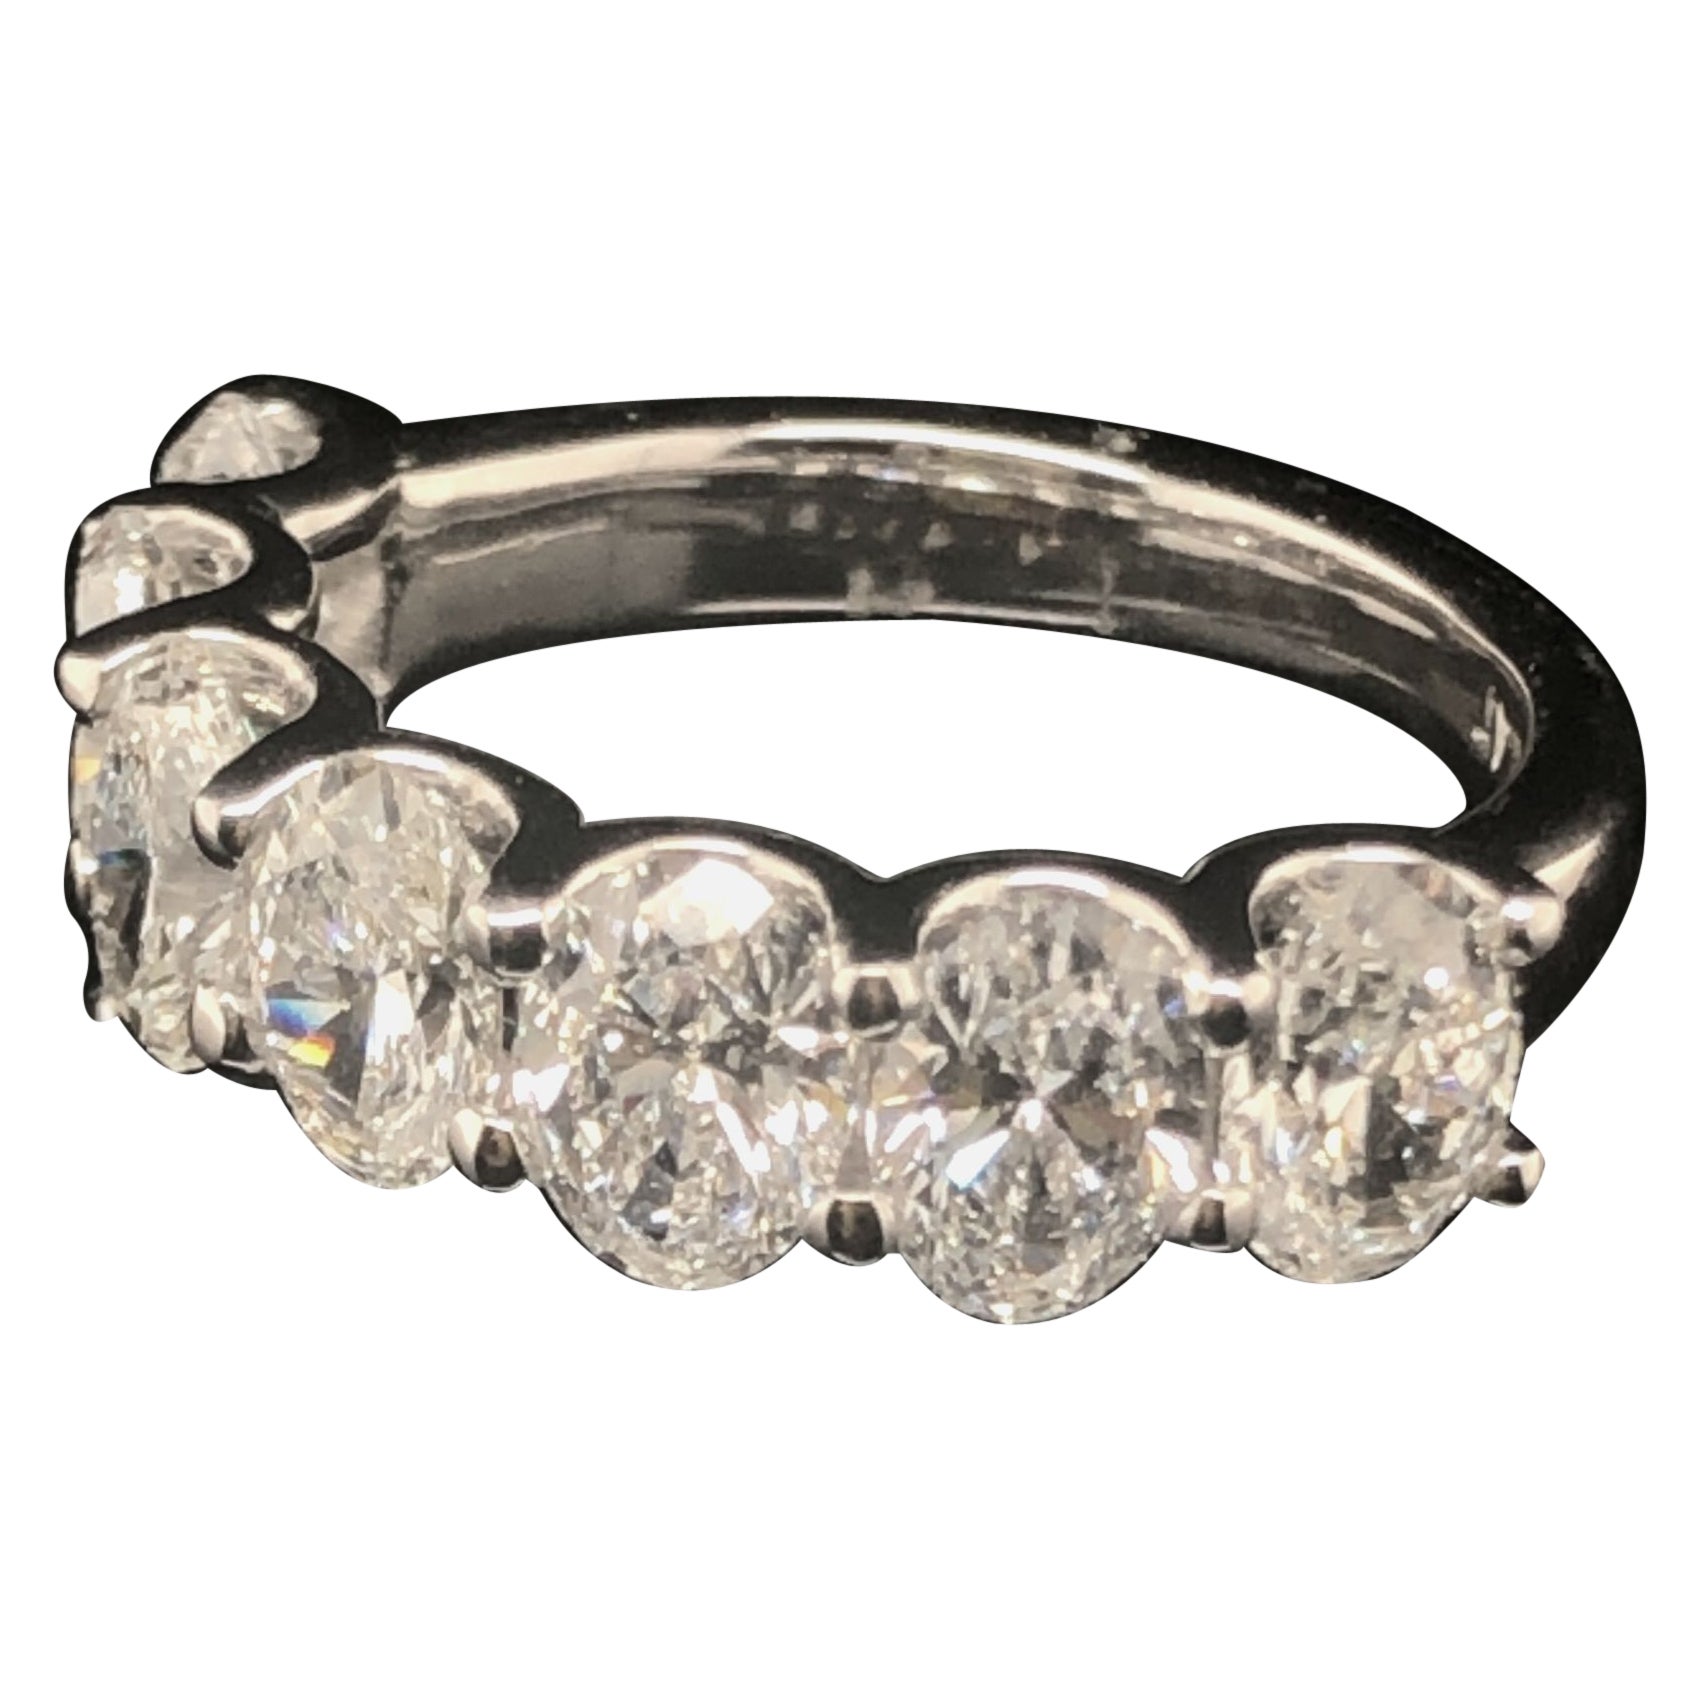 A half-way diamond band set with seven oval diamonds totaling 3.40 carats set in platinum is a stunning choice for a luxurious and elegant piece of jewelry. The combination of oval diamonds and platinum creates a timeless and sophisticated look that